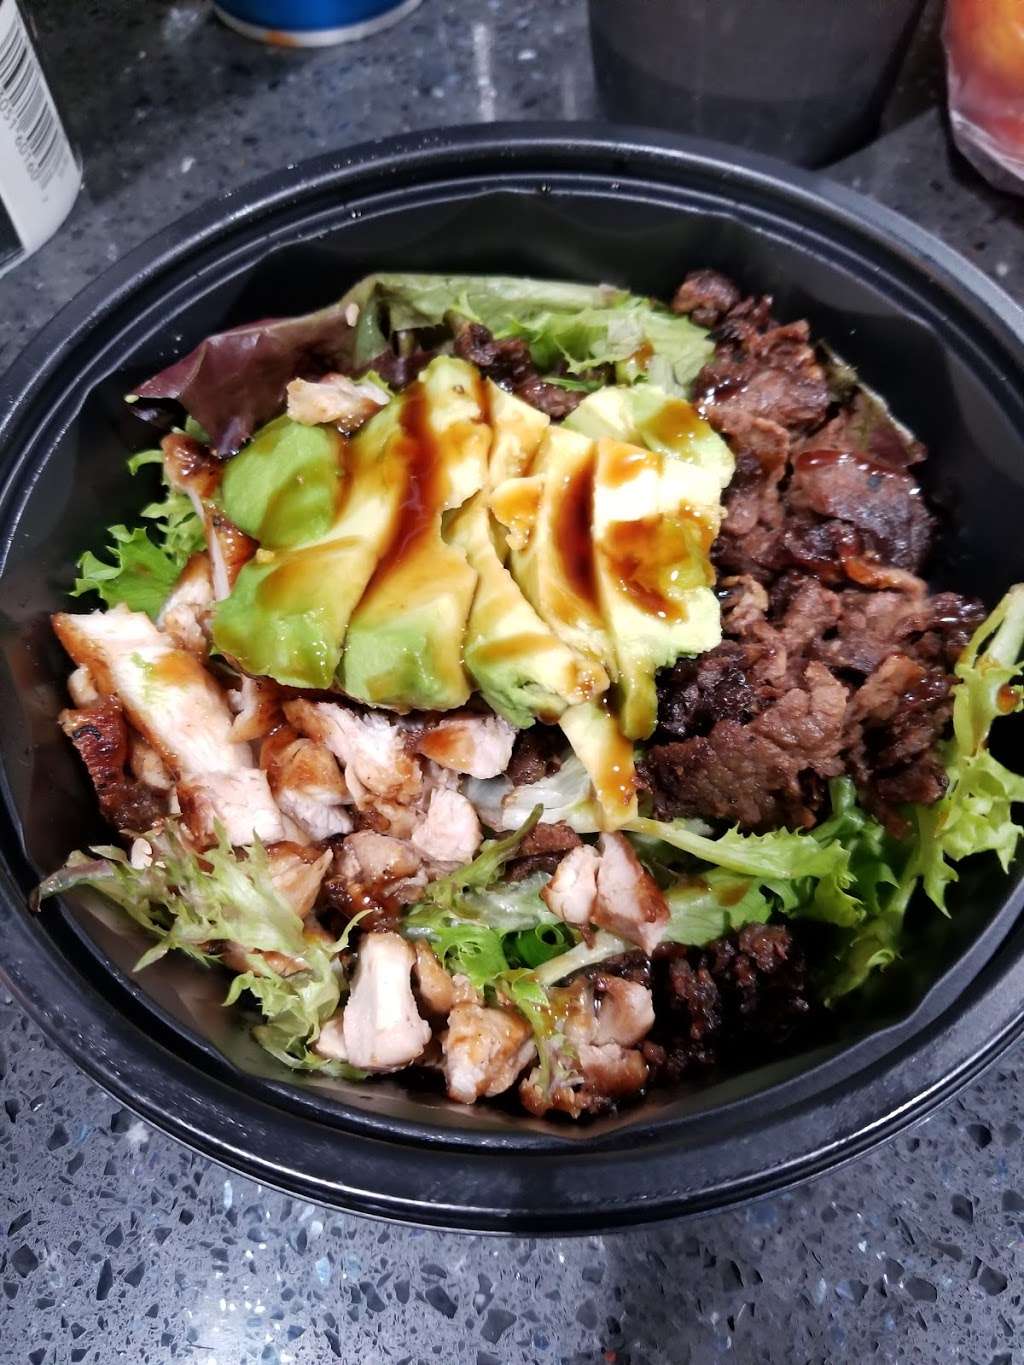 WaBa Grill | 3780 Mission Ave Suite, #2, Oceanside, CA 92058 | Phone: (760) 721-2702